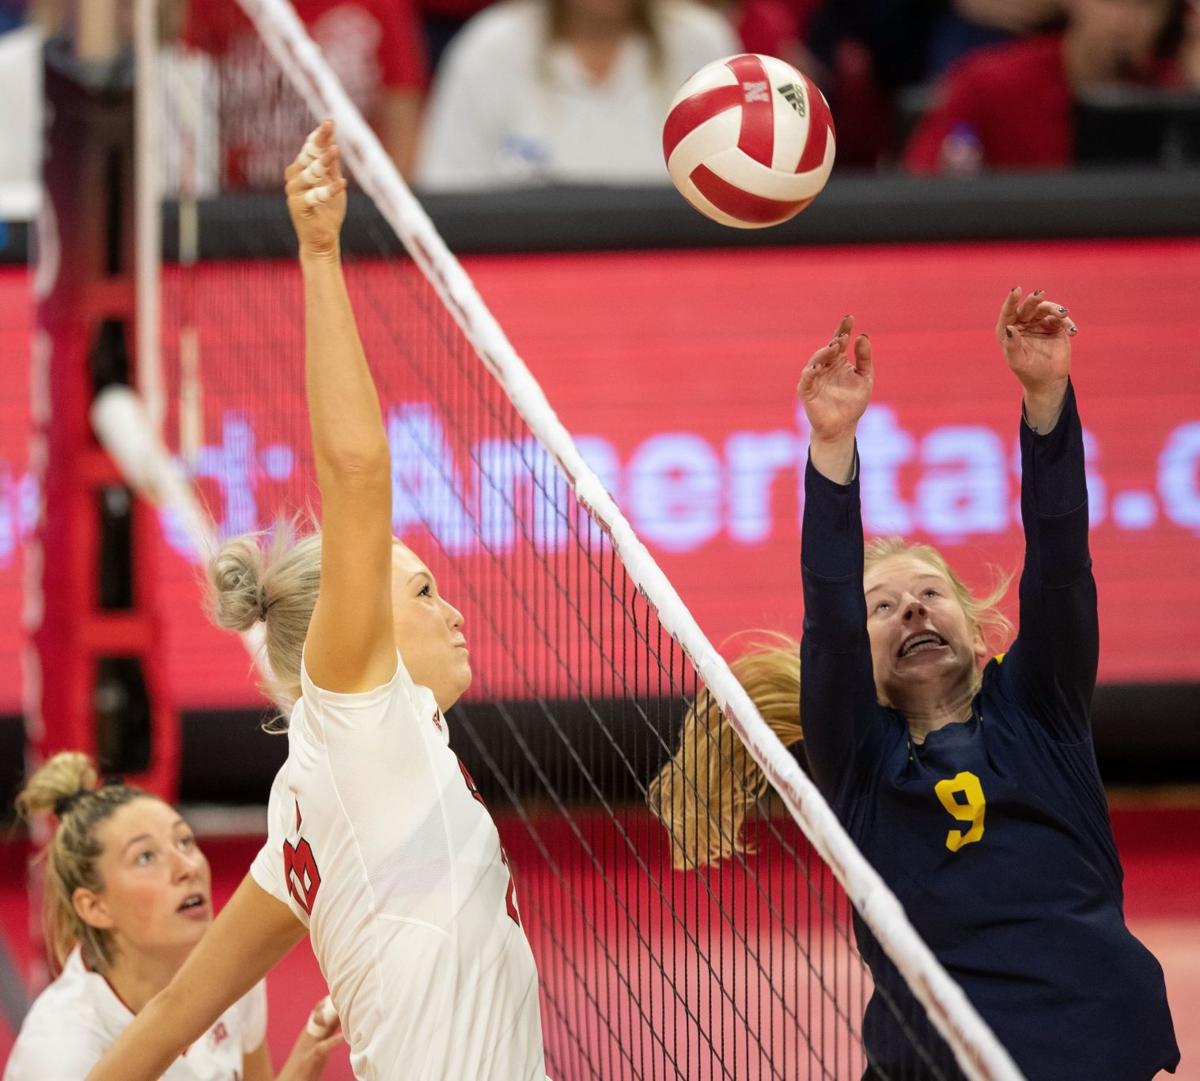 Lauren Stivrins appears 'nearly unstoppable' since Husker volleyball ...